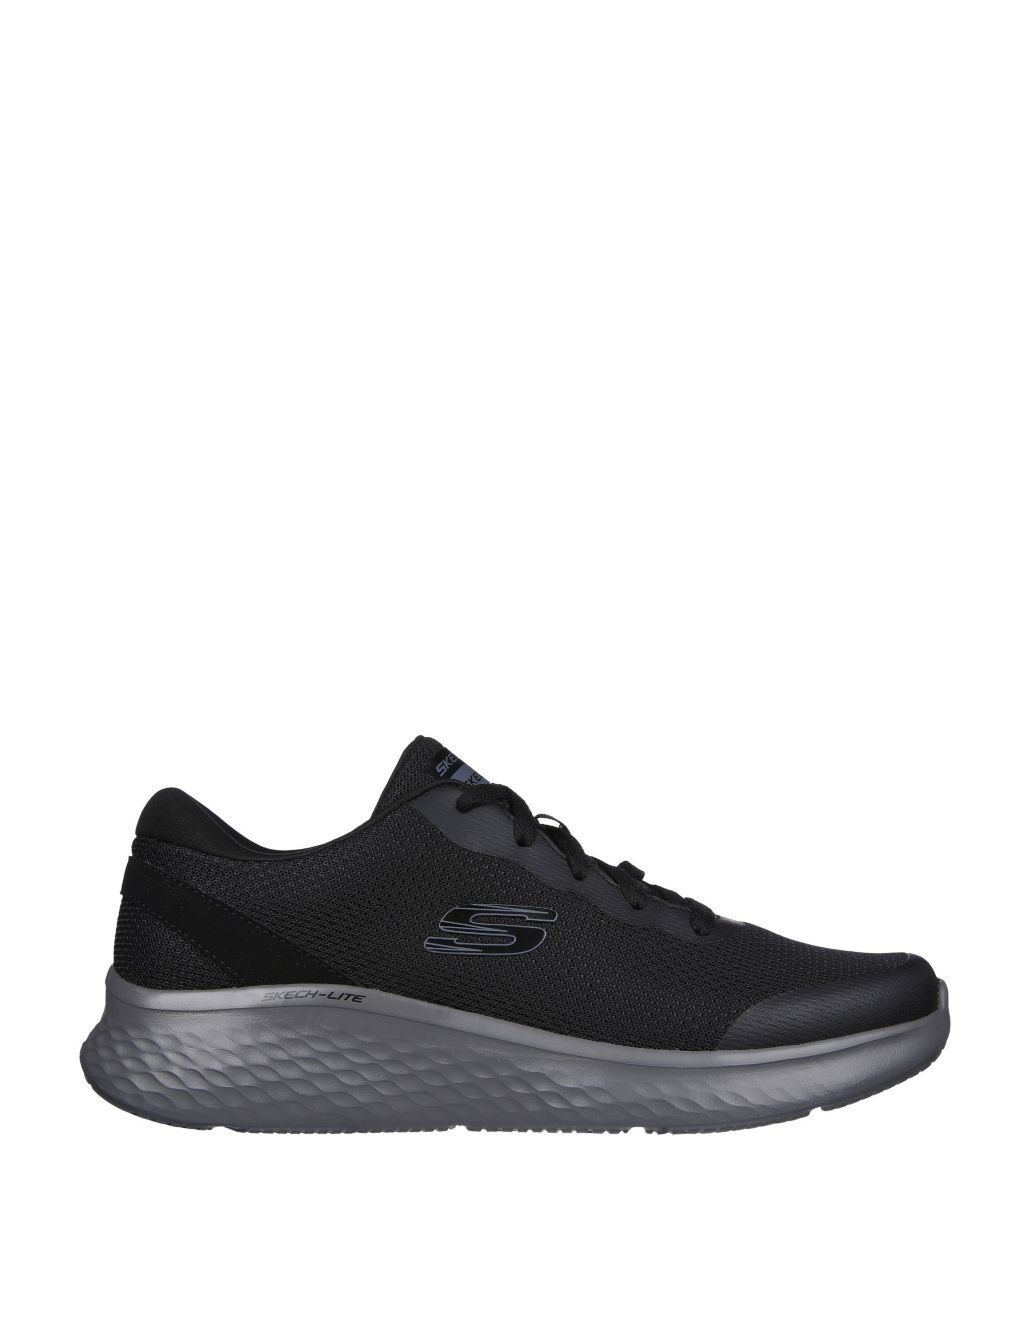 Skech-Lite Pro Clear Rush Lace Up Trainers image 1